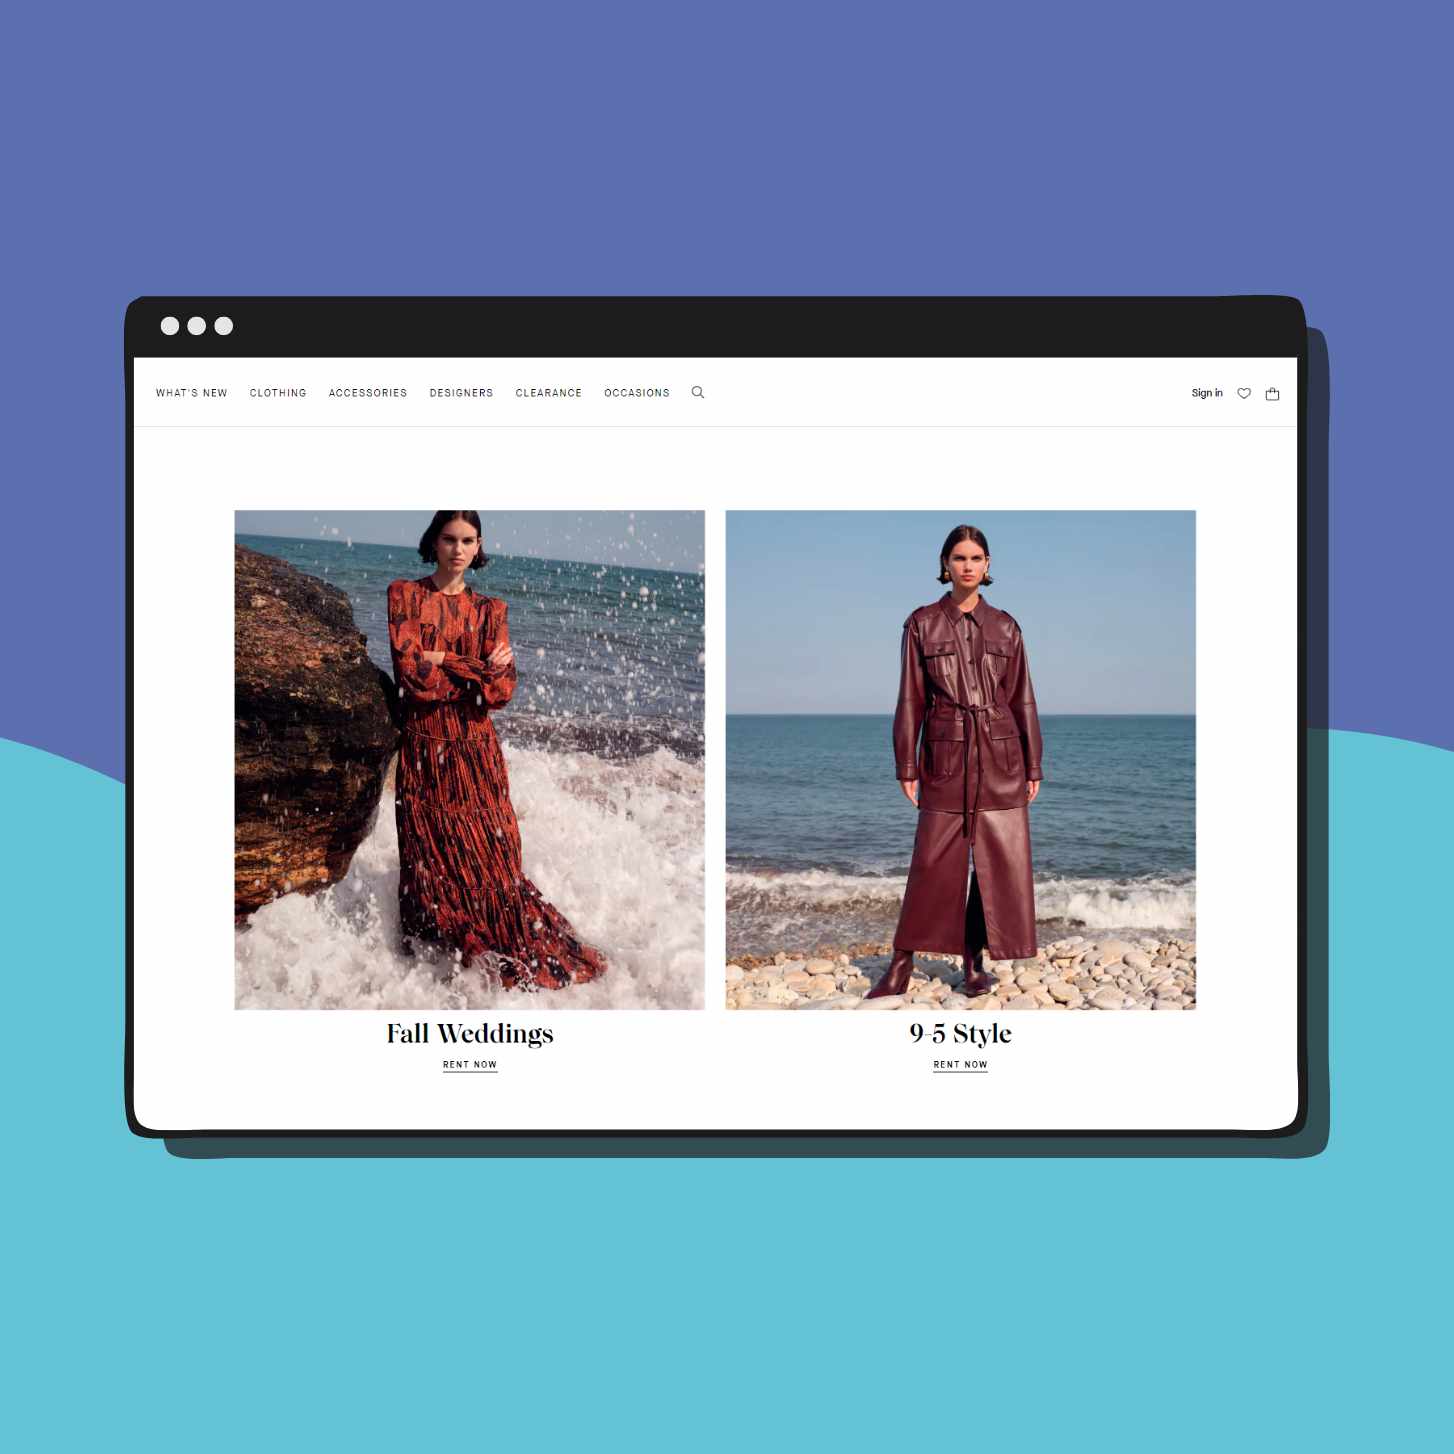 Rent The Runway Homepage Showcasing A Fall Wedding Dress On The Left and a 9-5 Style Jacket On The Right